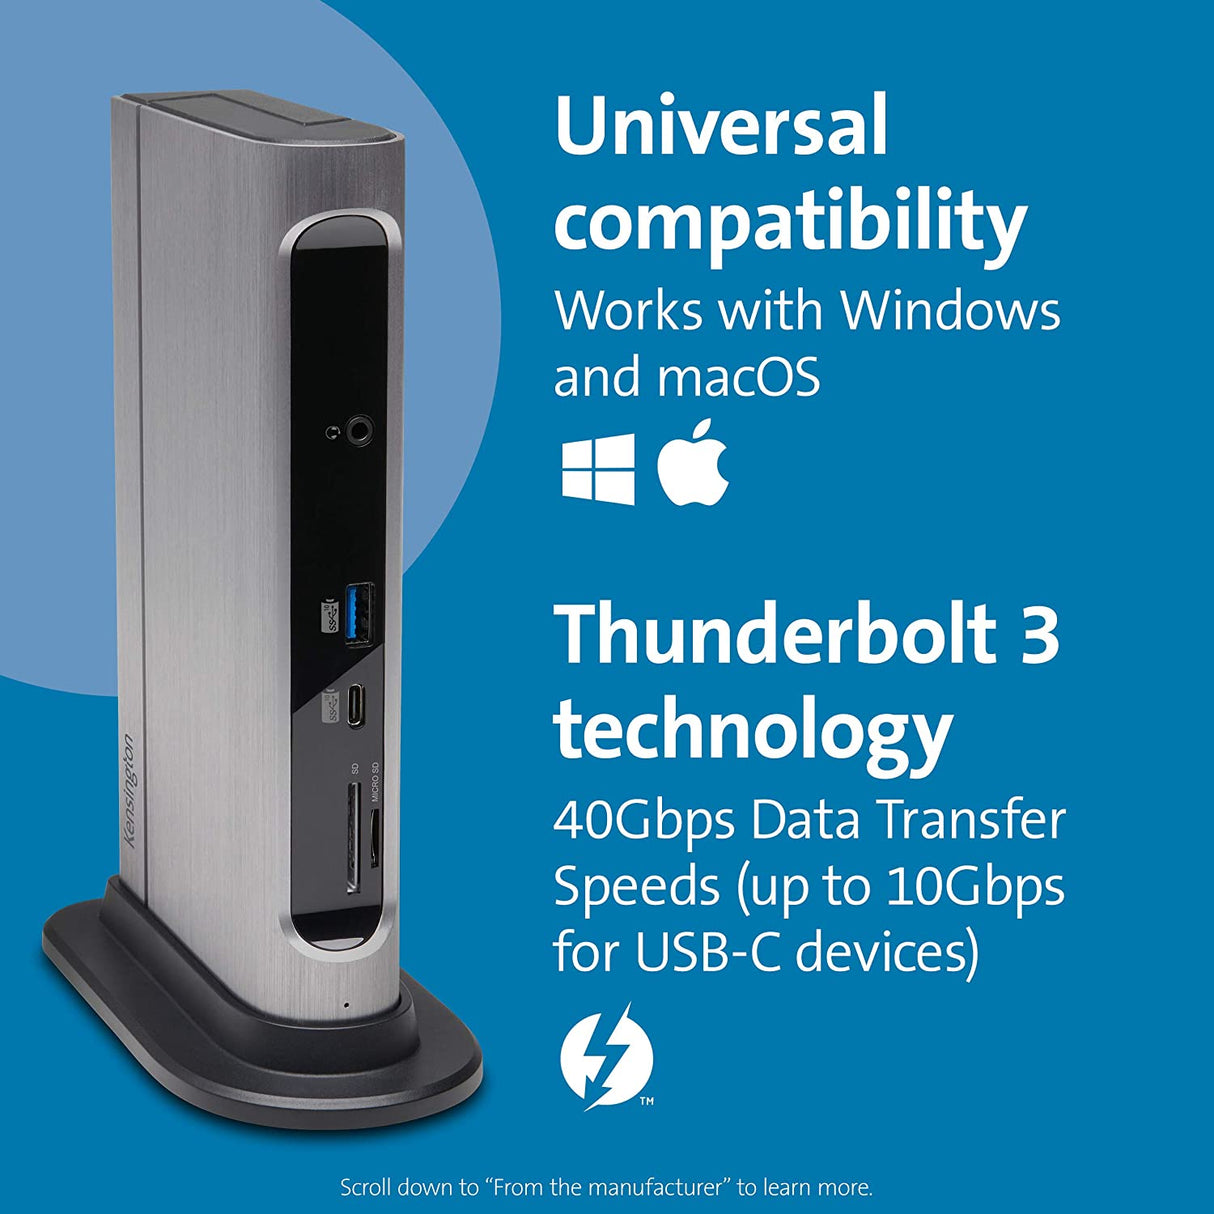 Kensington SD5600T 14-in-1 USB-C and Thunderbolt 3 Dock - Compatible with Mac and Windows, 96W Laptop Charging, 2X HDMI 2.0 and DisplayPort, 7X USB Ports, Ethernet, Audio, SD/MicroSD (K34009US)